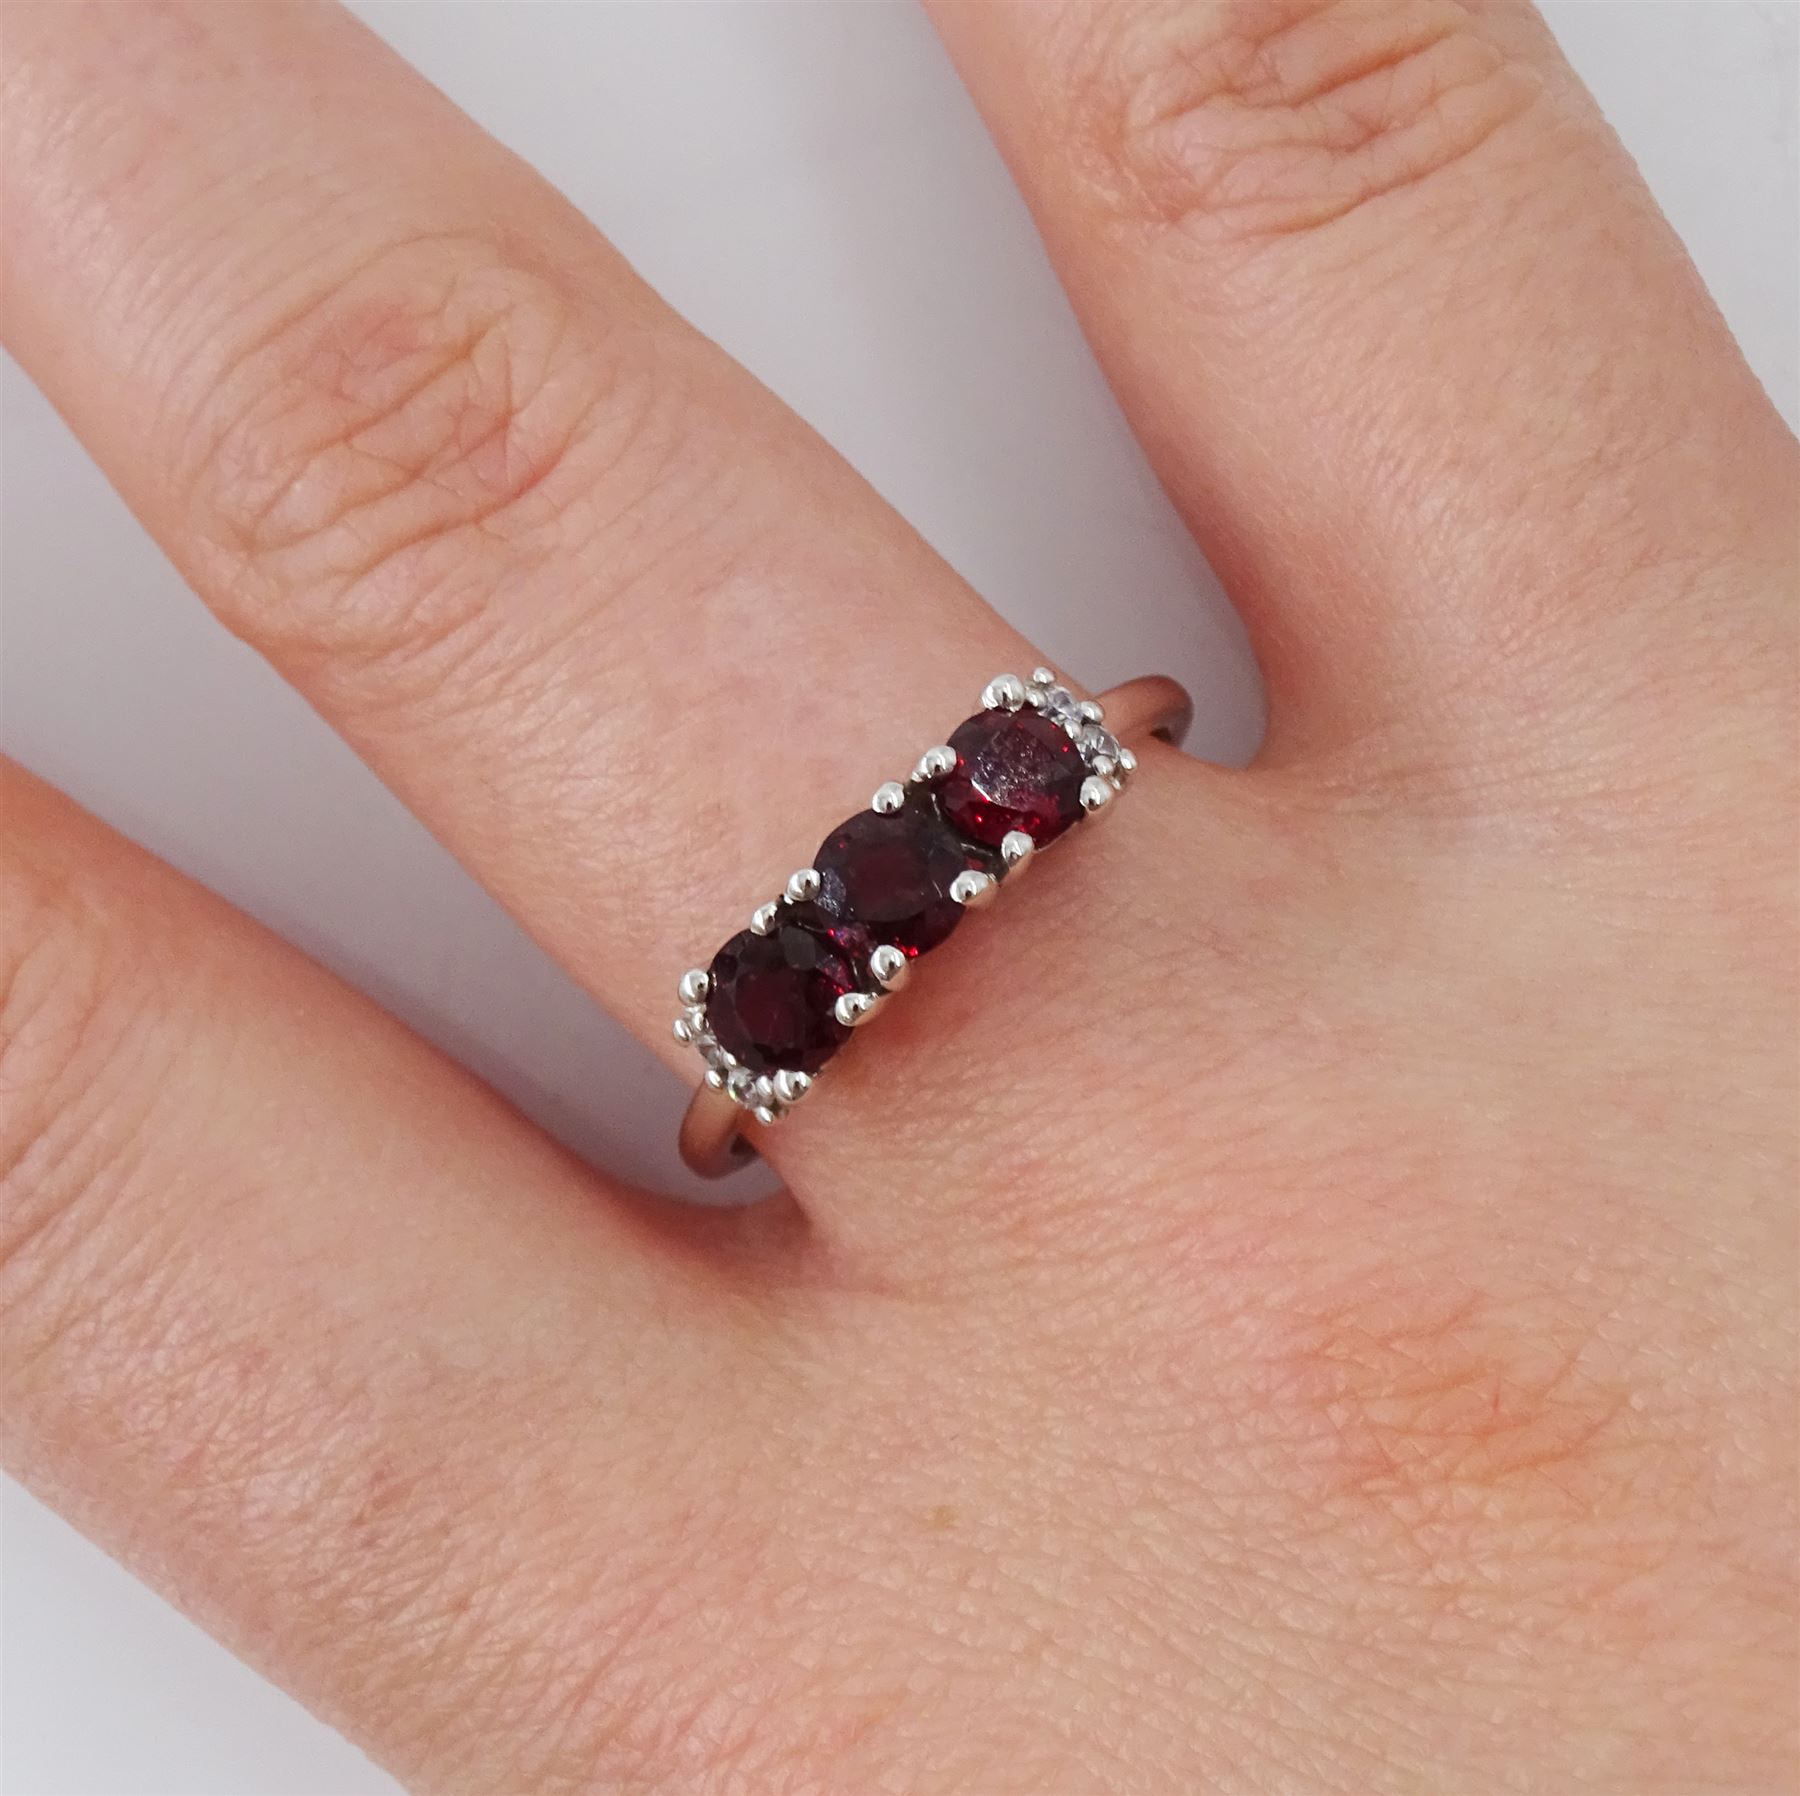 9ct white gold garnet and diamond cluster ring - Image 2 of 4